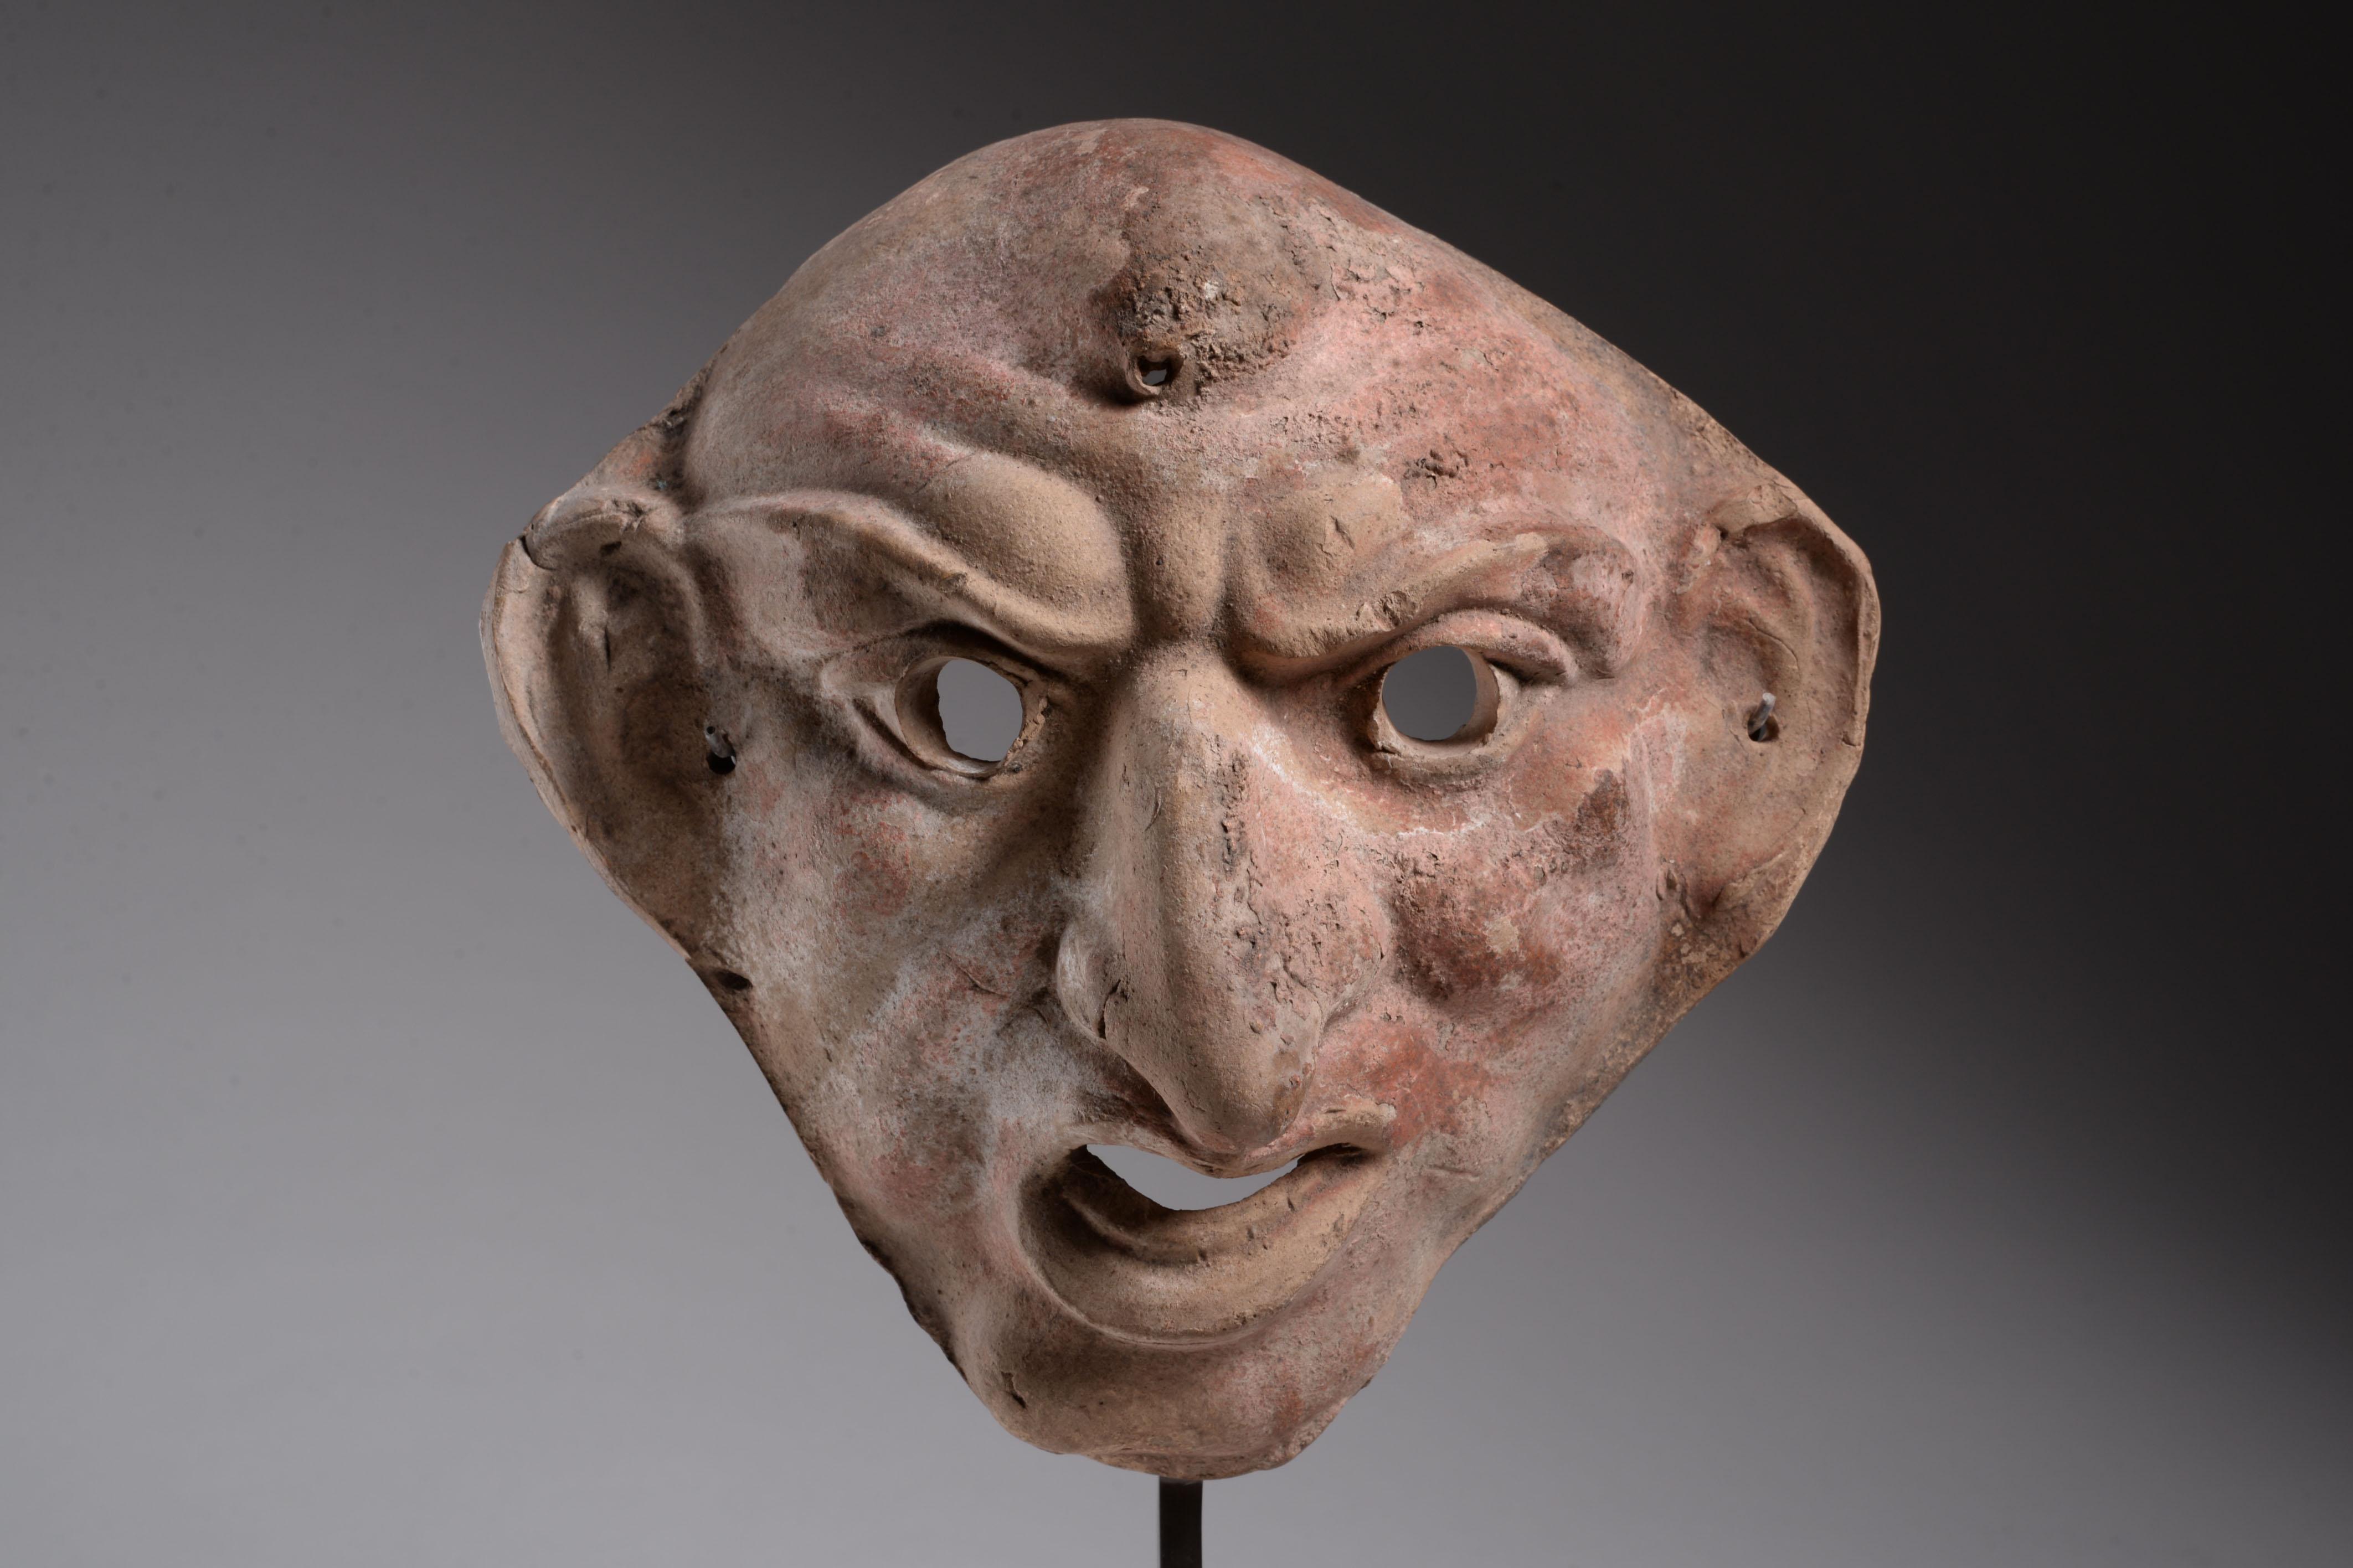 Grotesque theatrical mask of Maccus
Late Hellenistic or Early Imperial period, circa 1st century B.C. – 1st century A.D., likely from Southern Italy.
Terracotta with remains of pink and white pigment
Measure: Height: 20 cm. 
With old label